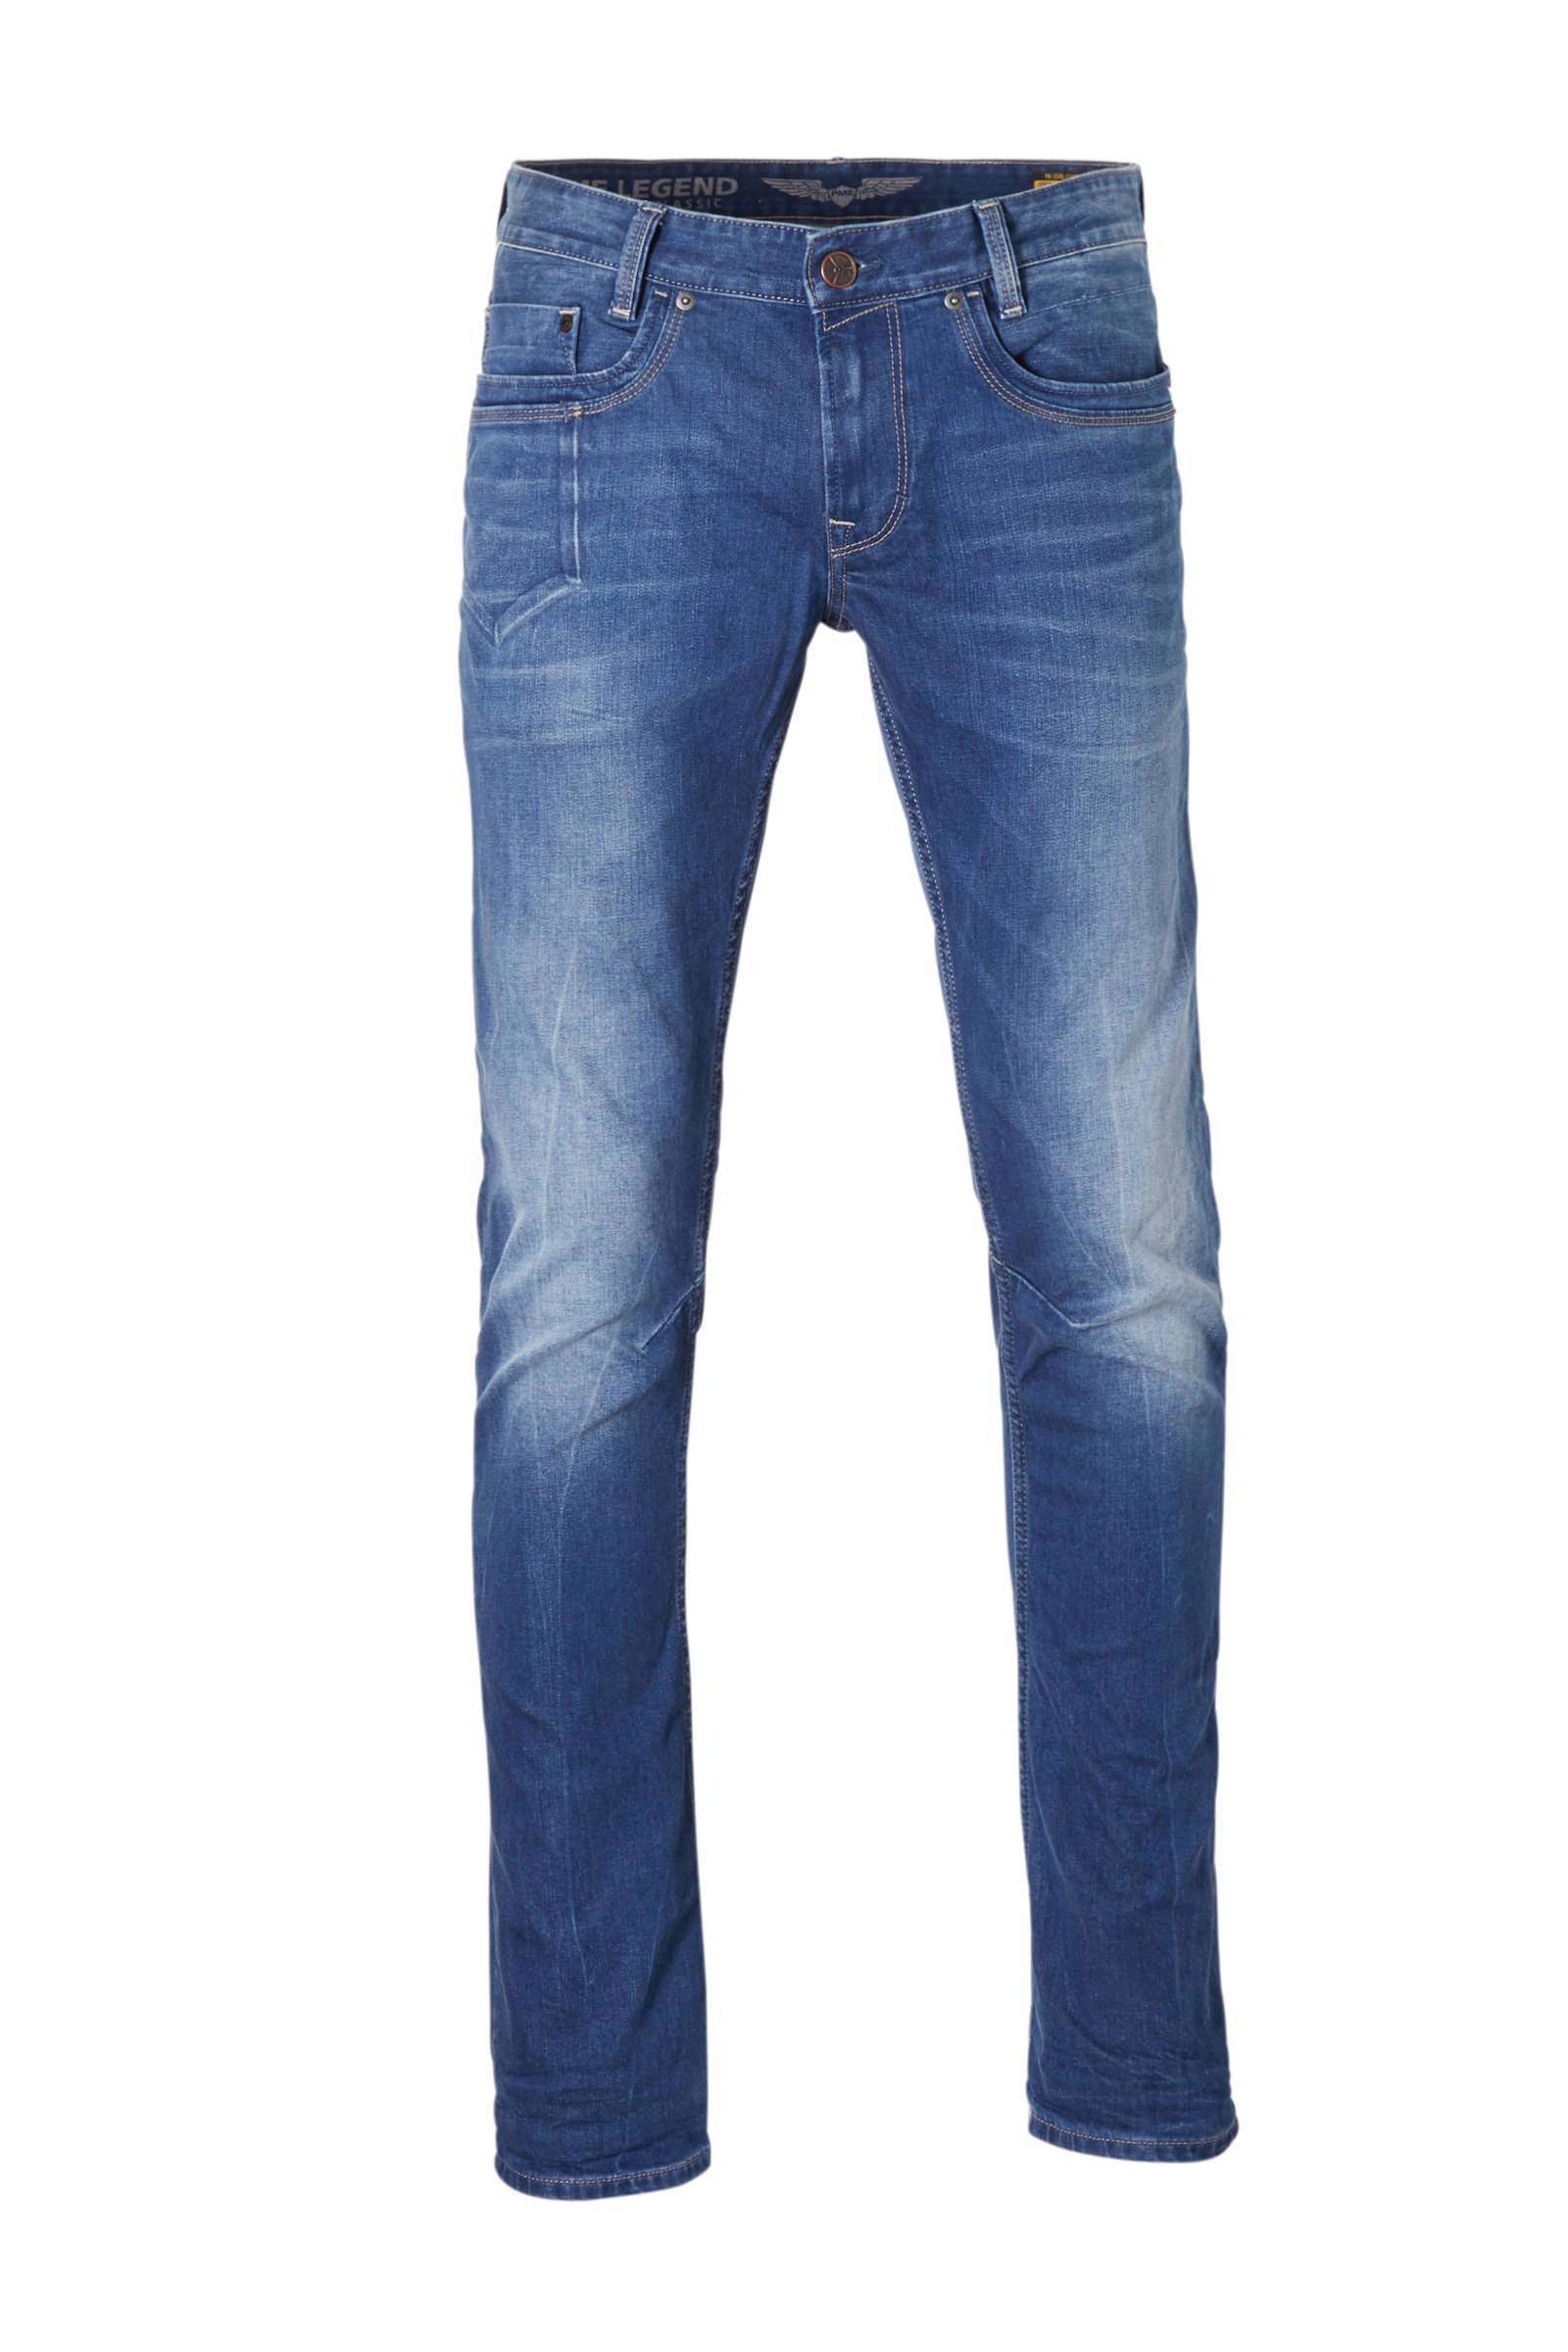 pme legend skymaster tapered fit jeans